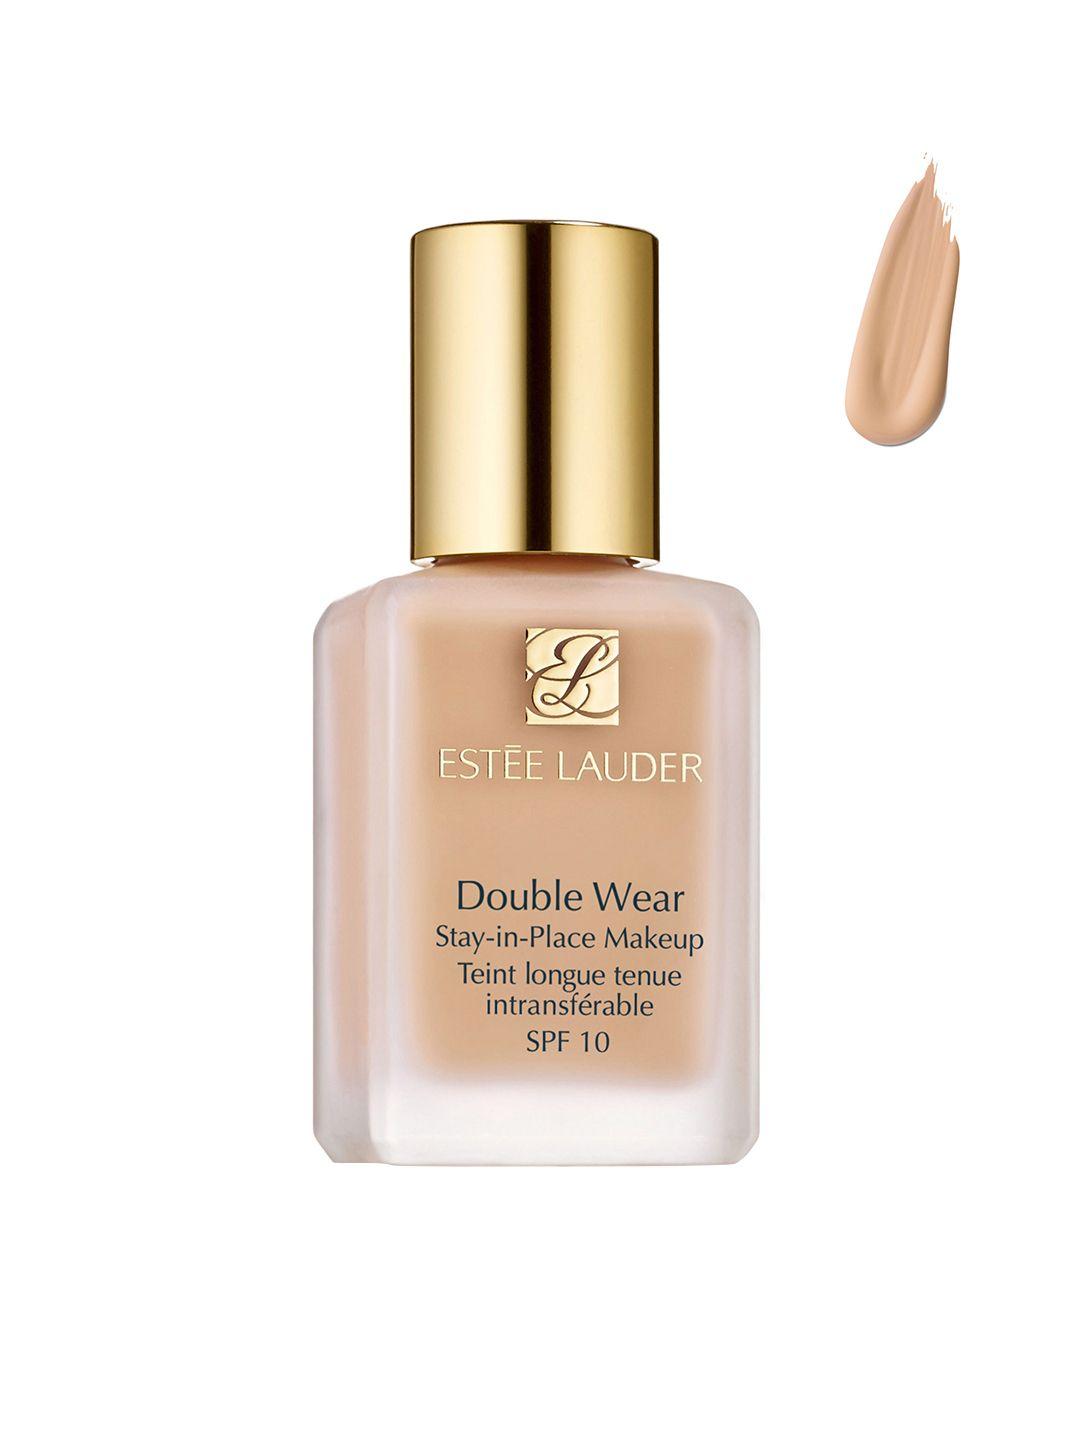 estee lauder shell double wear stay-in-place makeup spf 10 foundation 30 ml